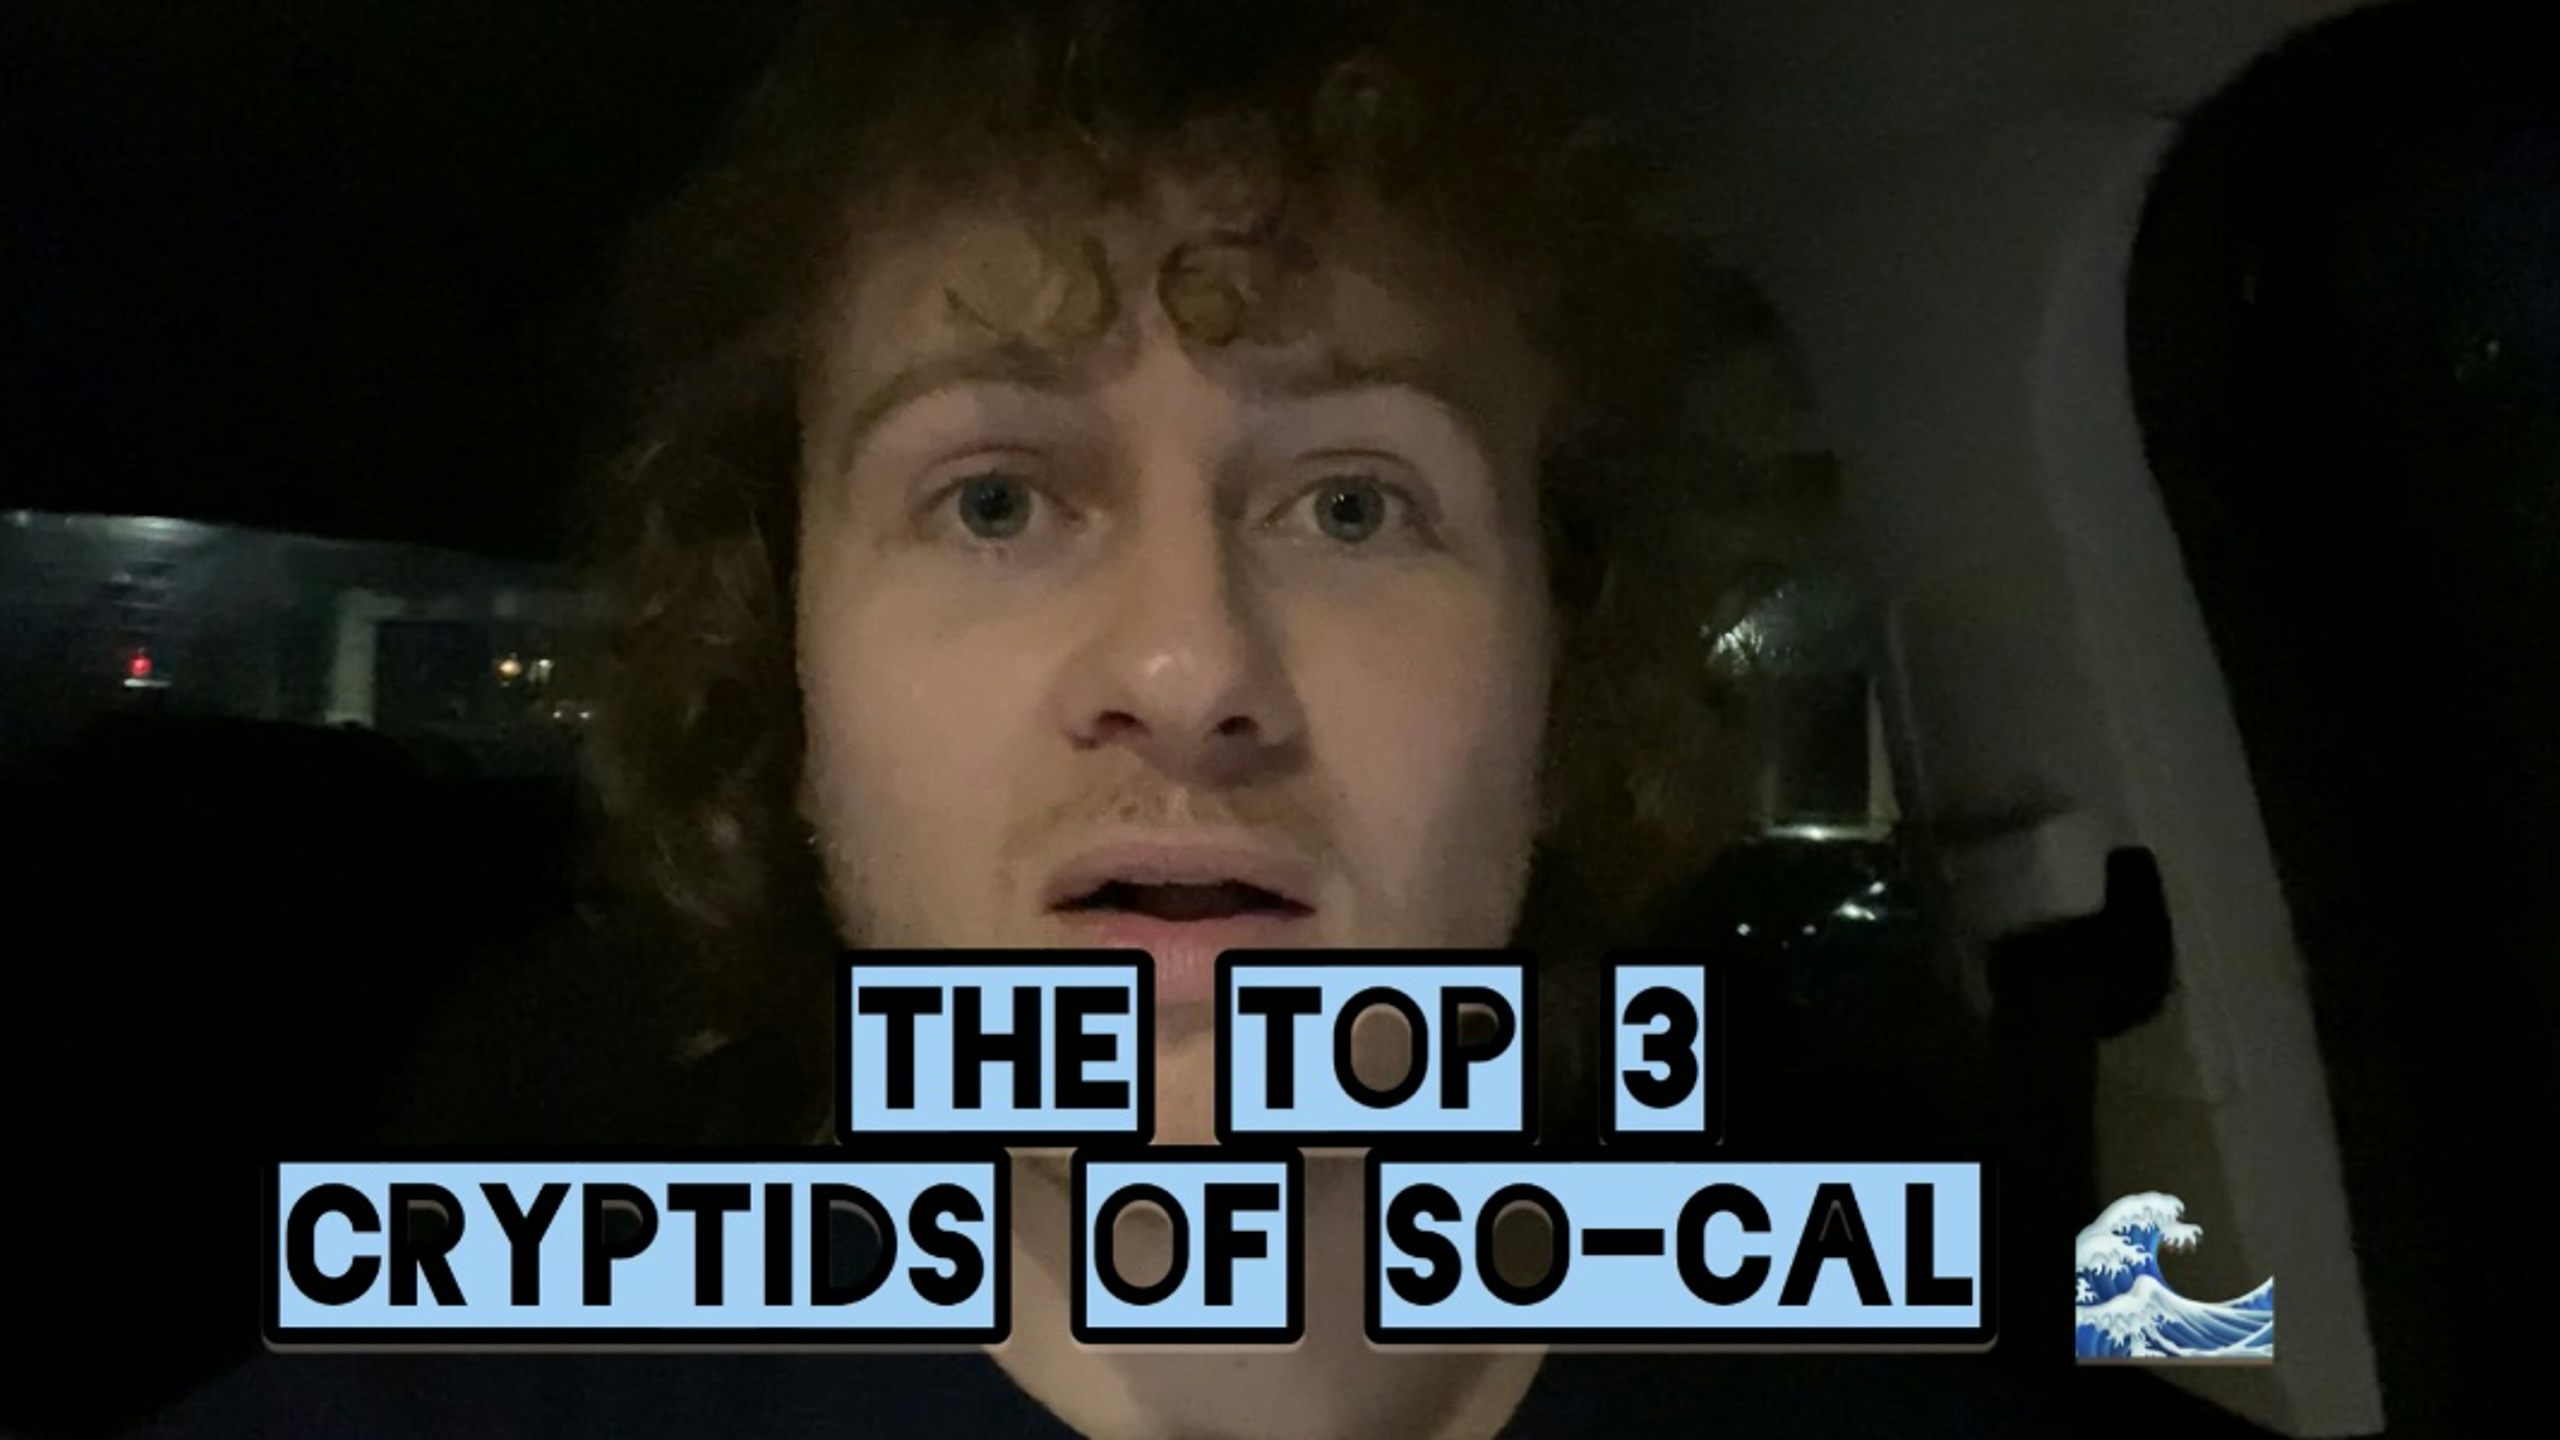 Top 3 Cryptids of So-Cal